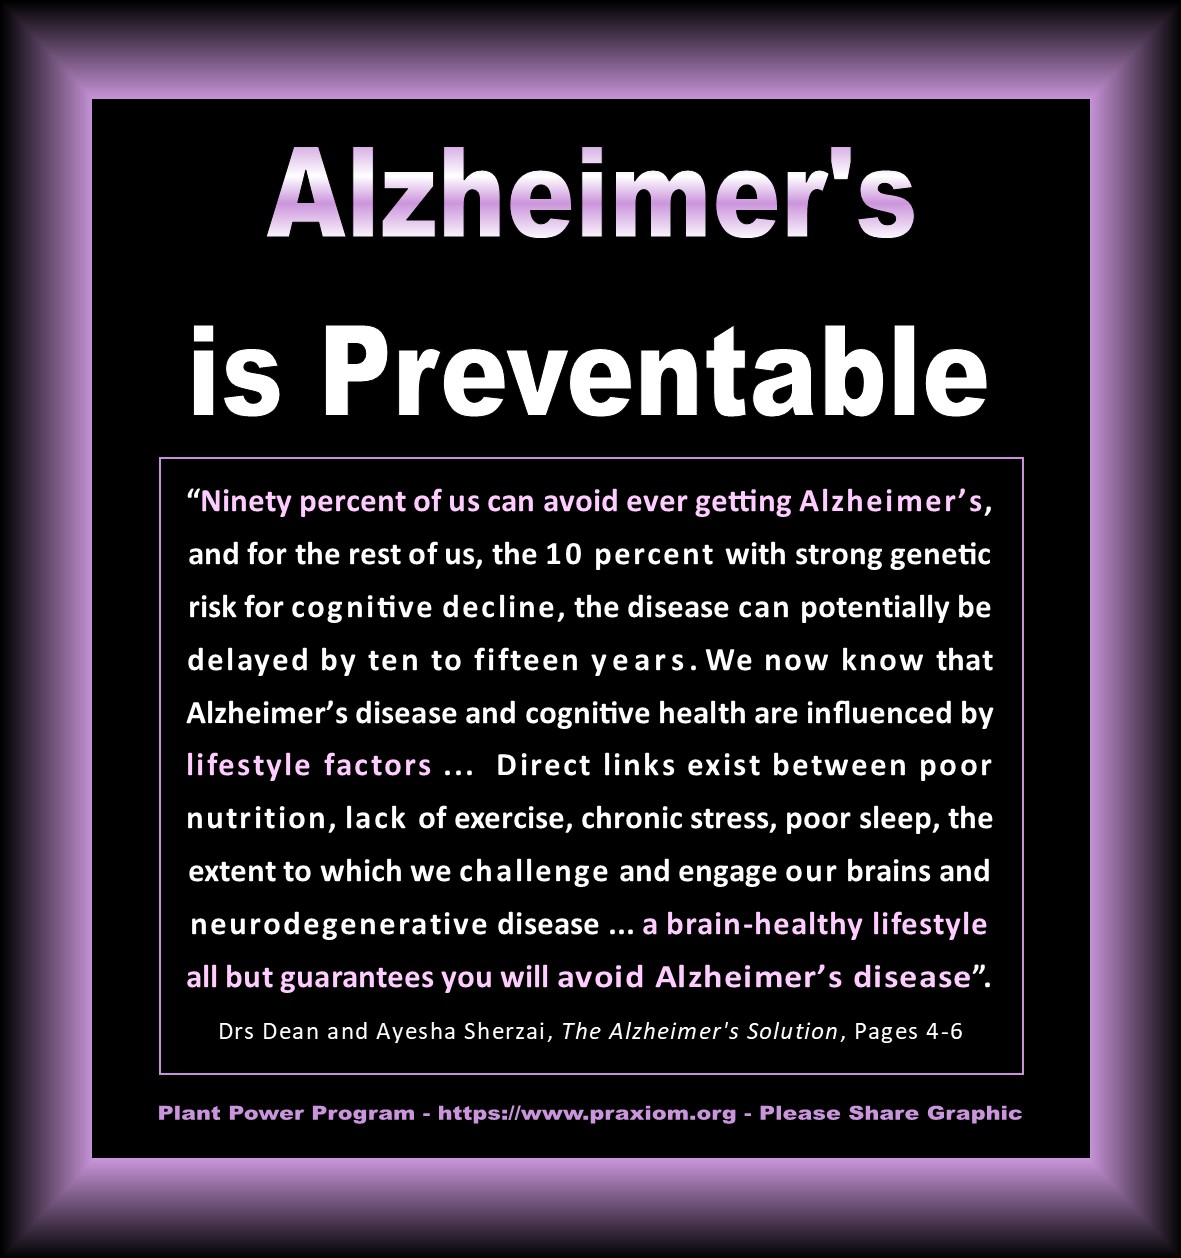 Alzheimer's Disease is Preventable - Drs. Dean and Ayesha Sherzai